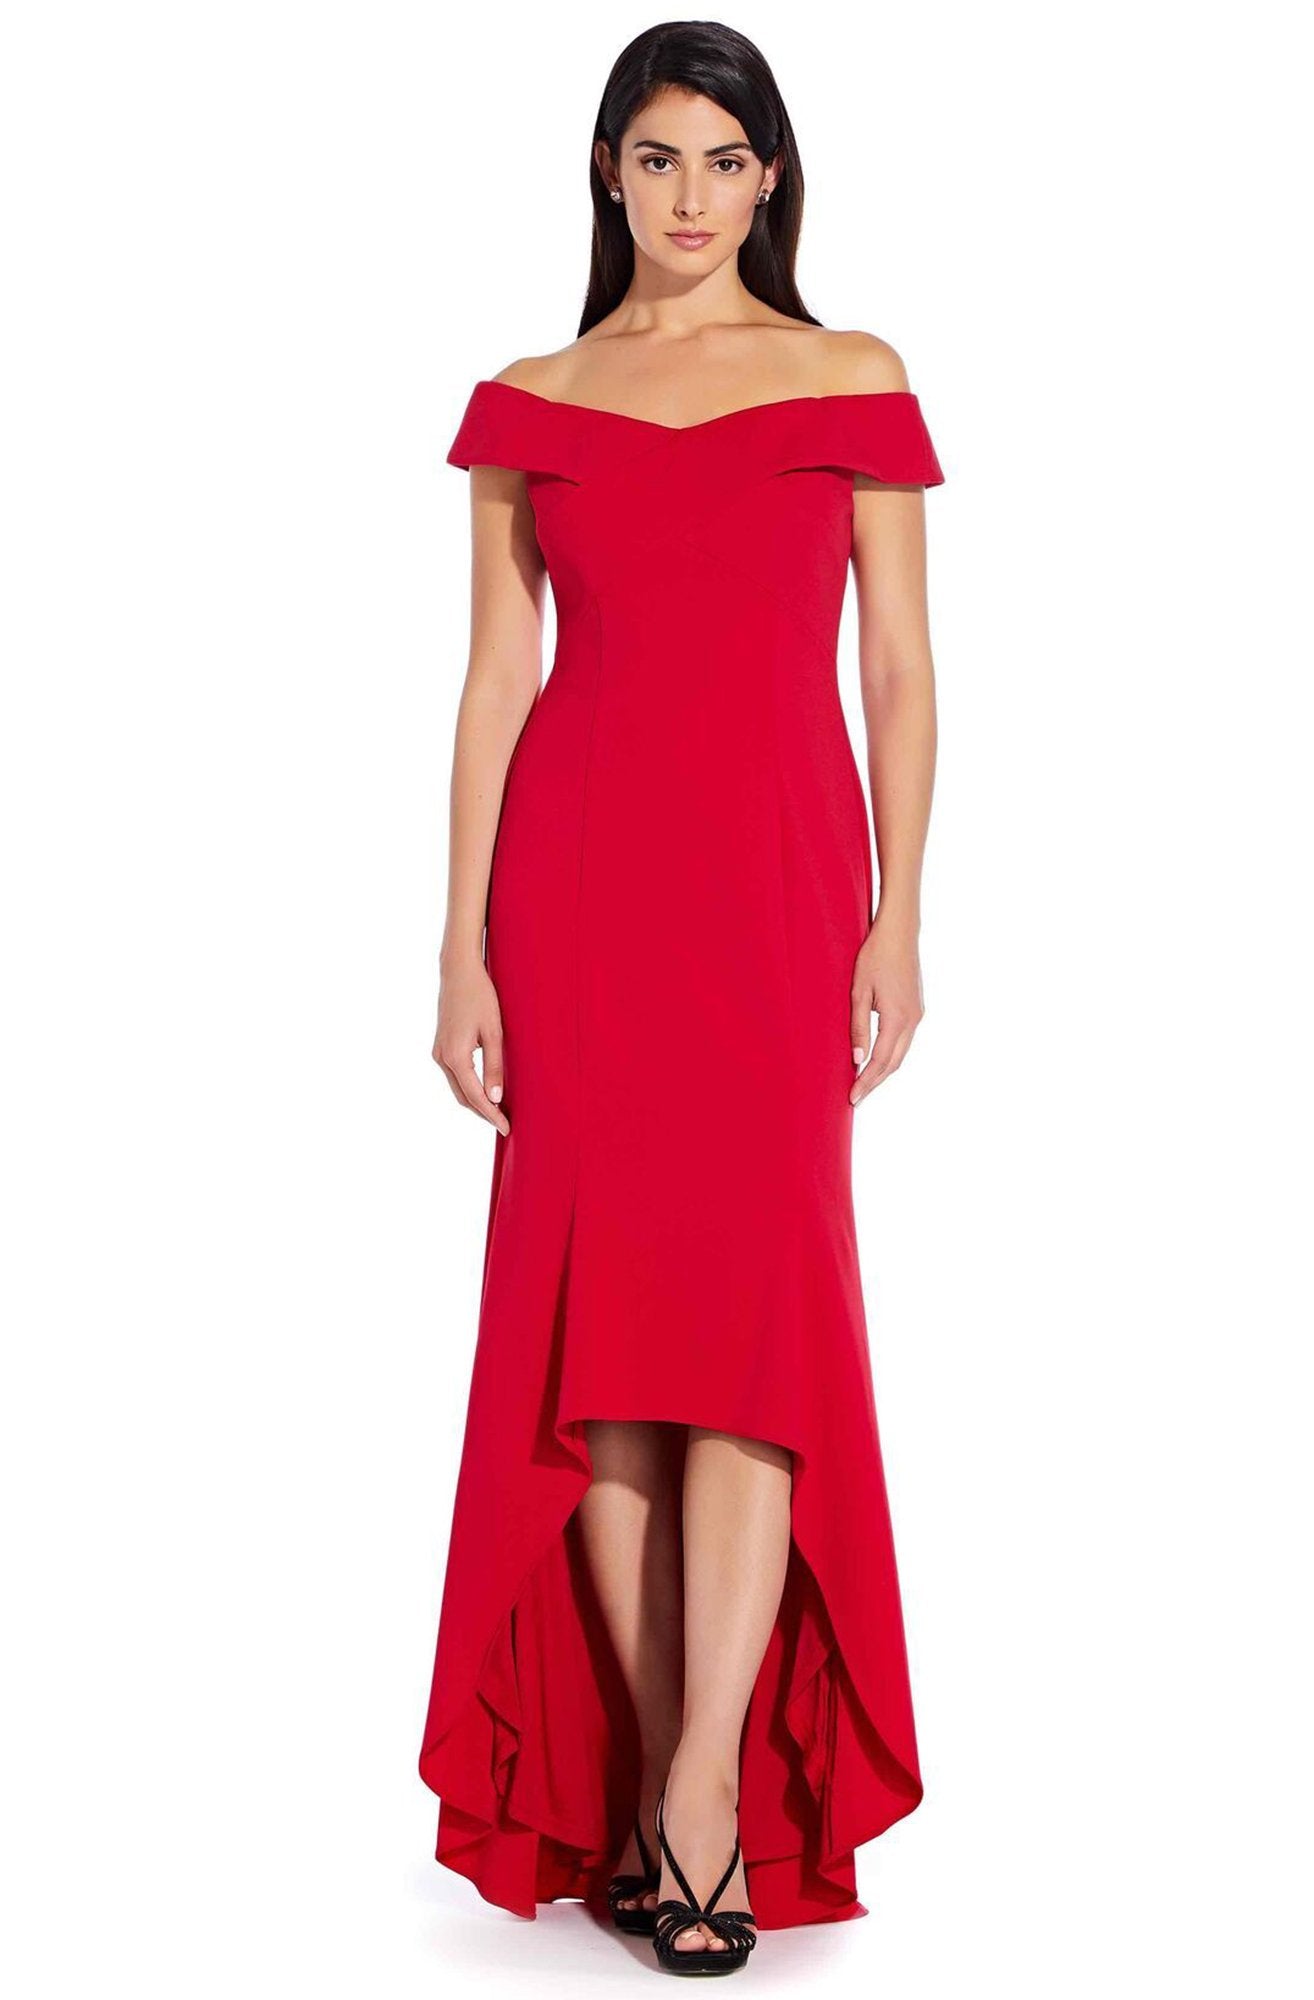 Adrianna Papell - AP1E206023 Off-Shoulder Stretch Crepe High Low Dress In Red